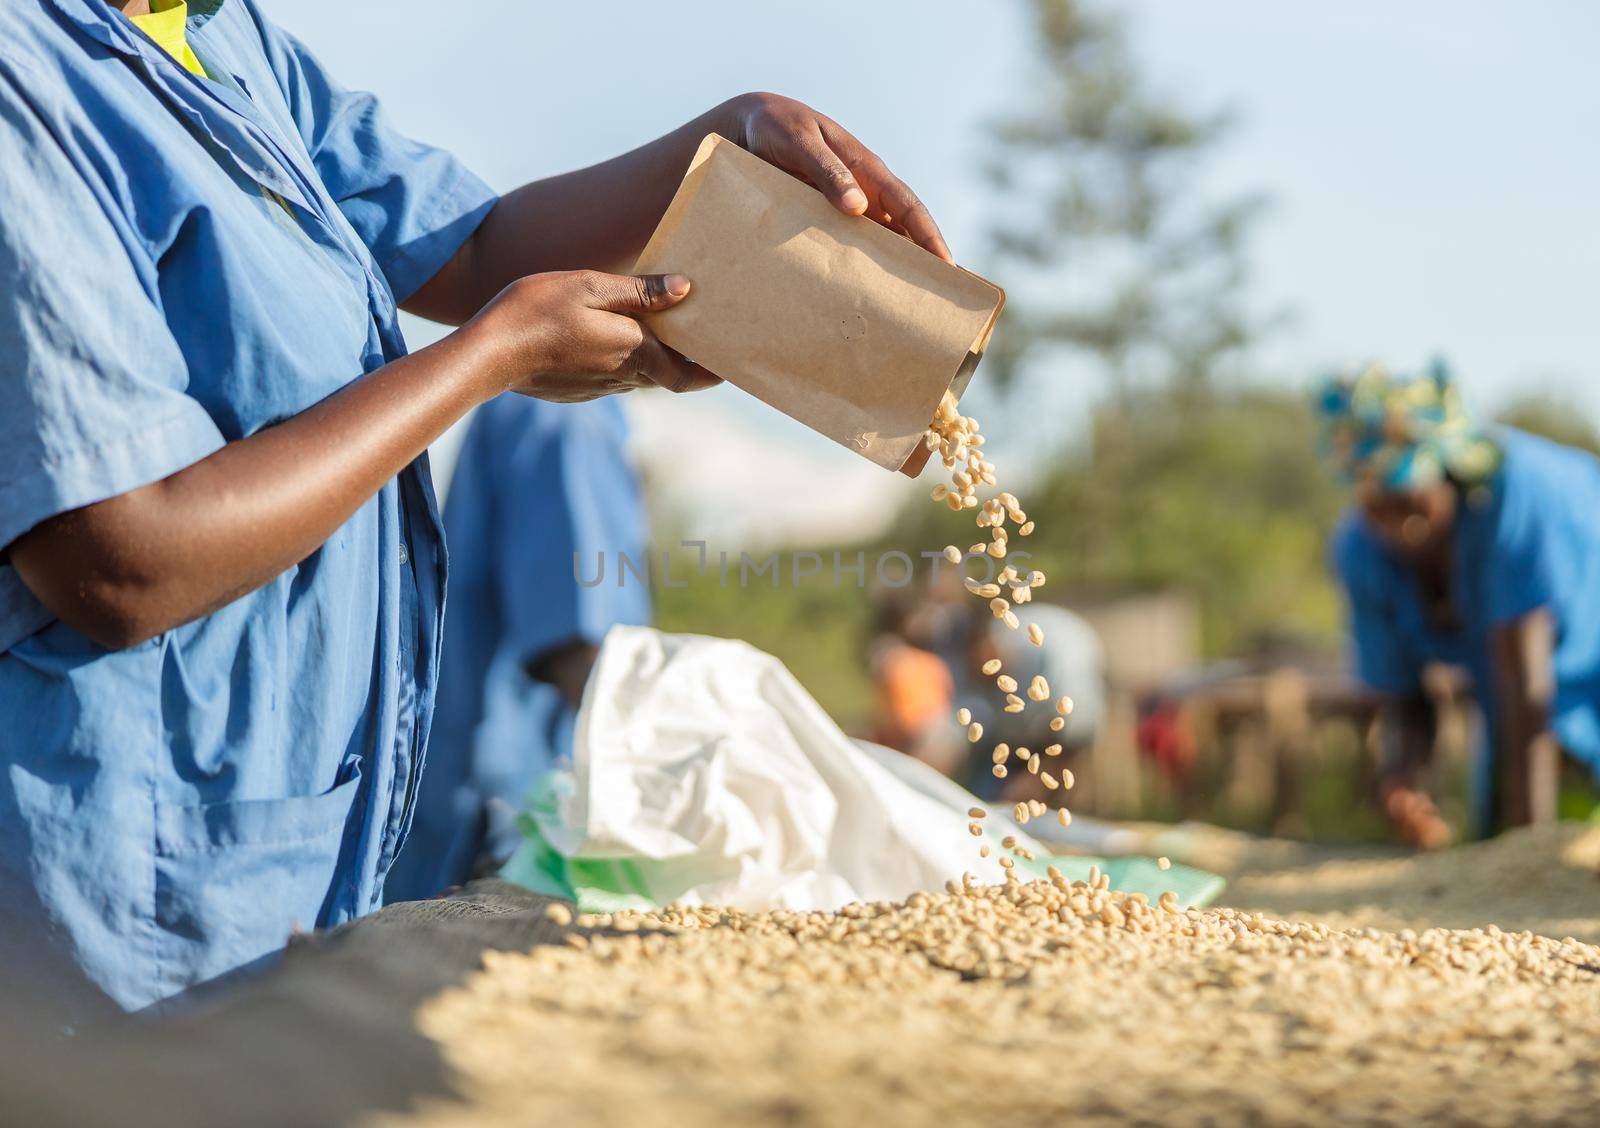 Farm worker pouring coffee beans from a paper bag at a coffee washing station in Africa region